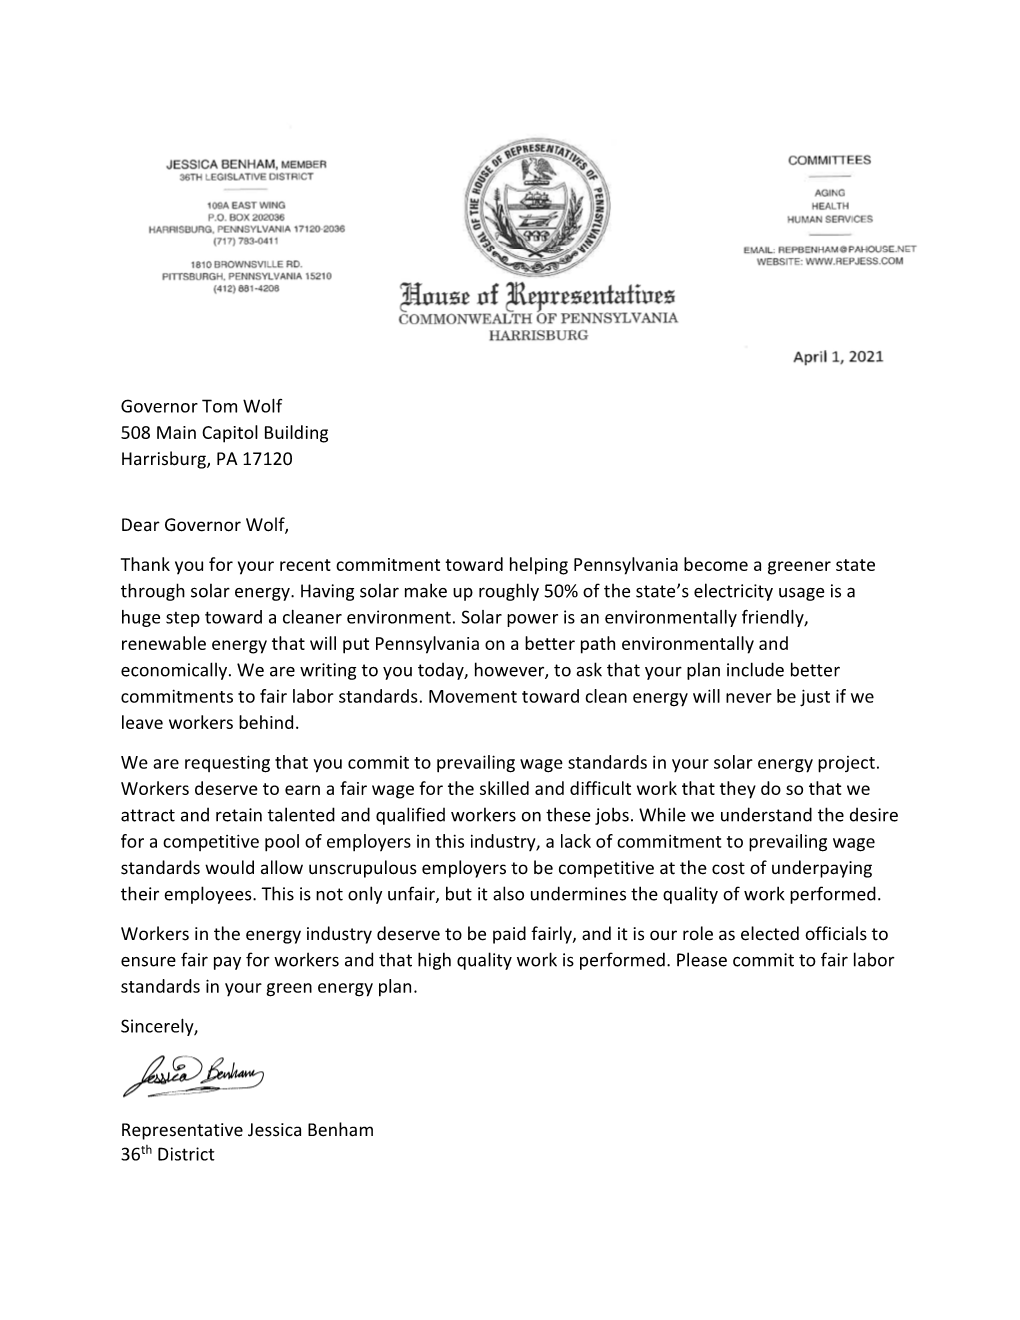 Letter to Gov. Wolf